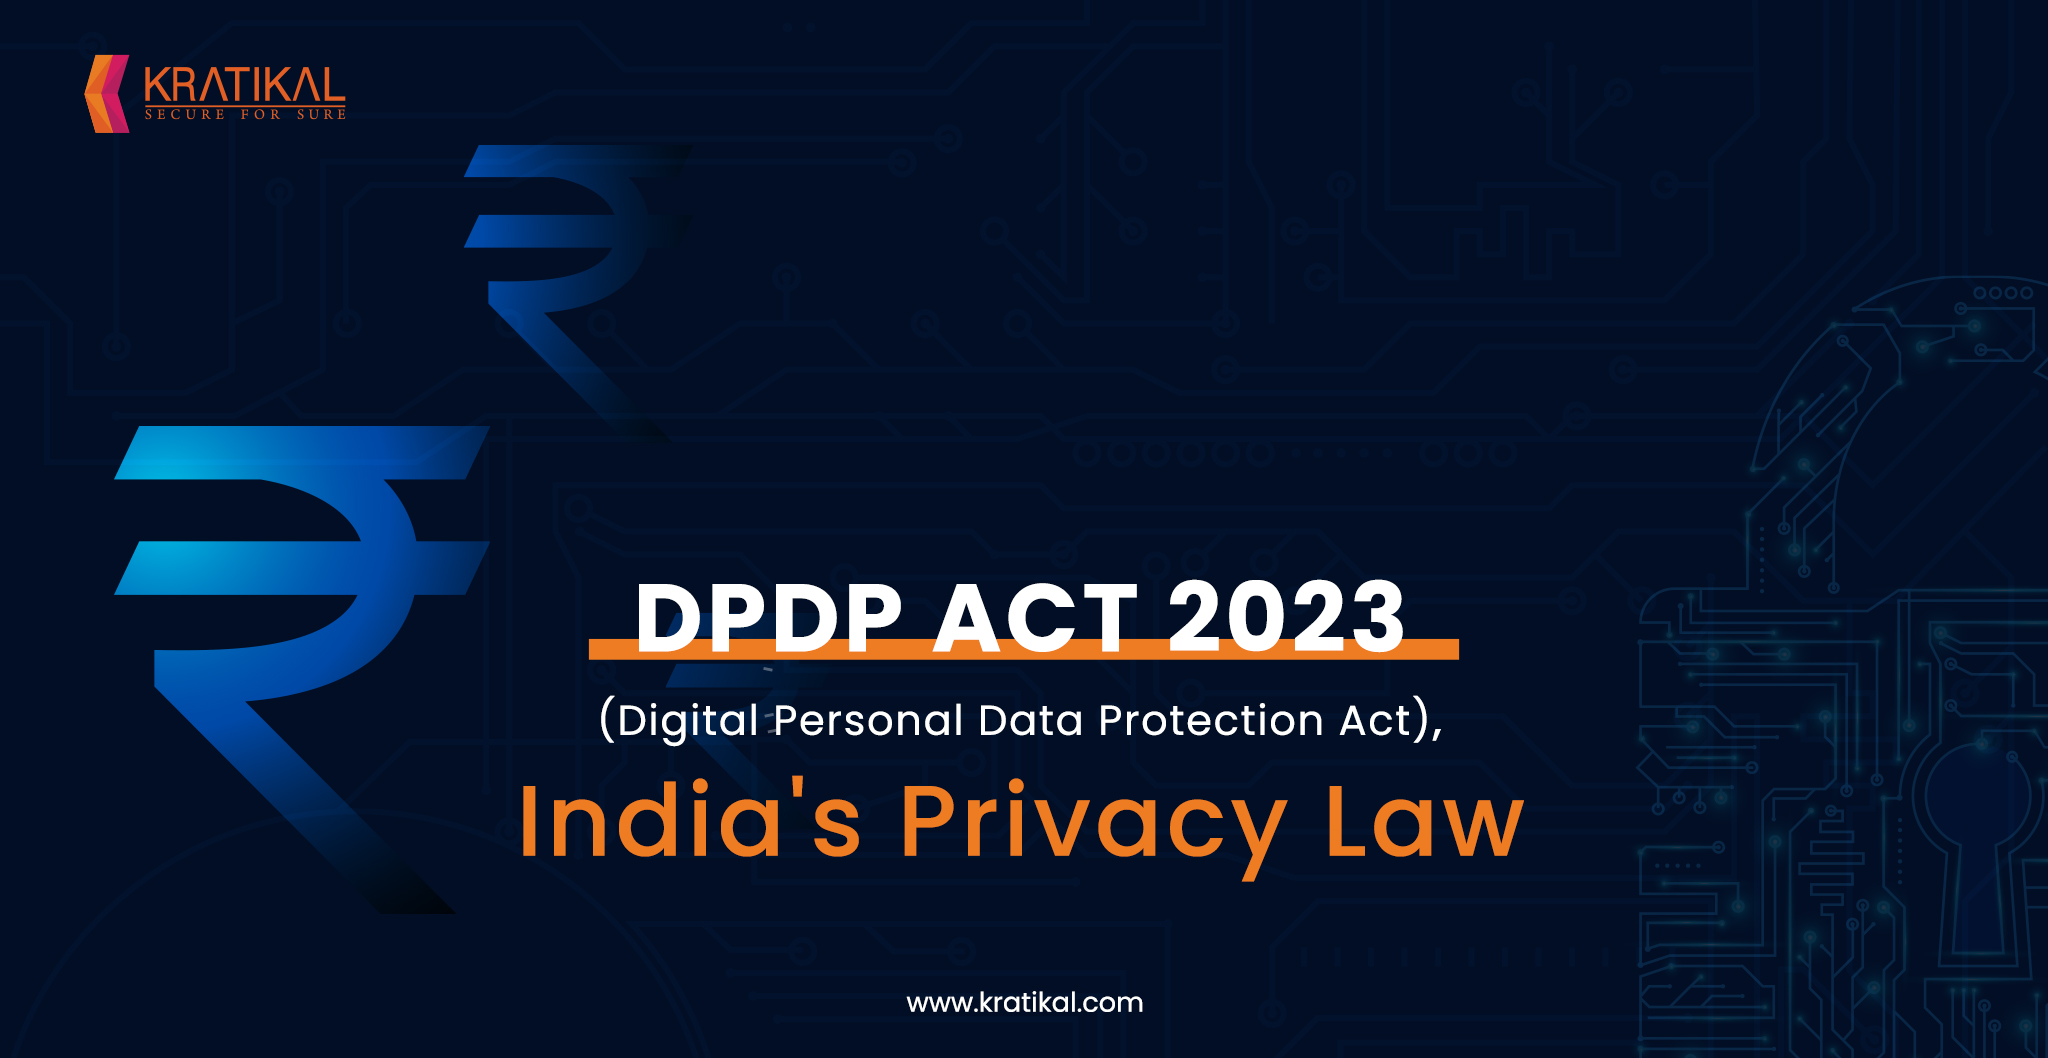 Digital Personal Data Protection Act (DPDP ACT) 2023, India's Privacy Law